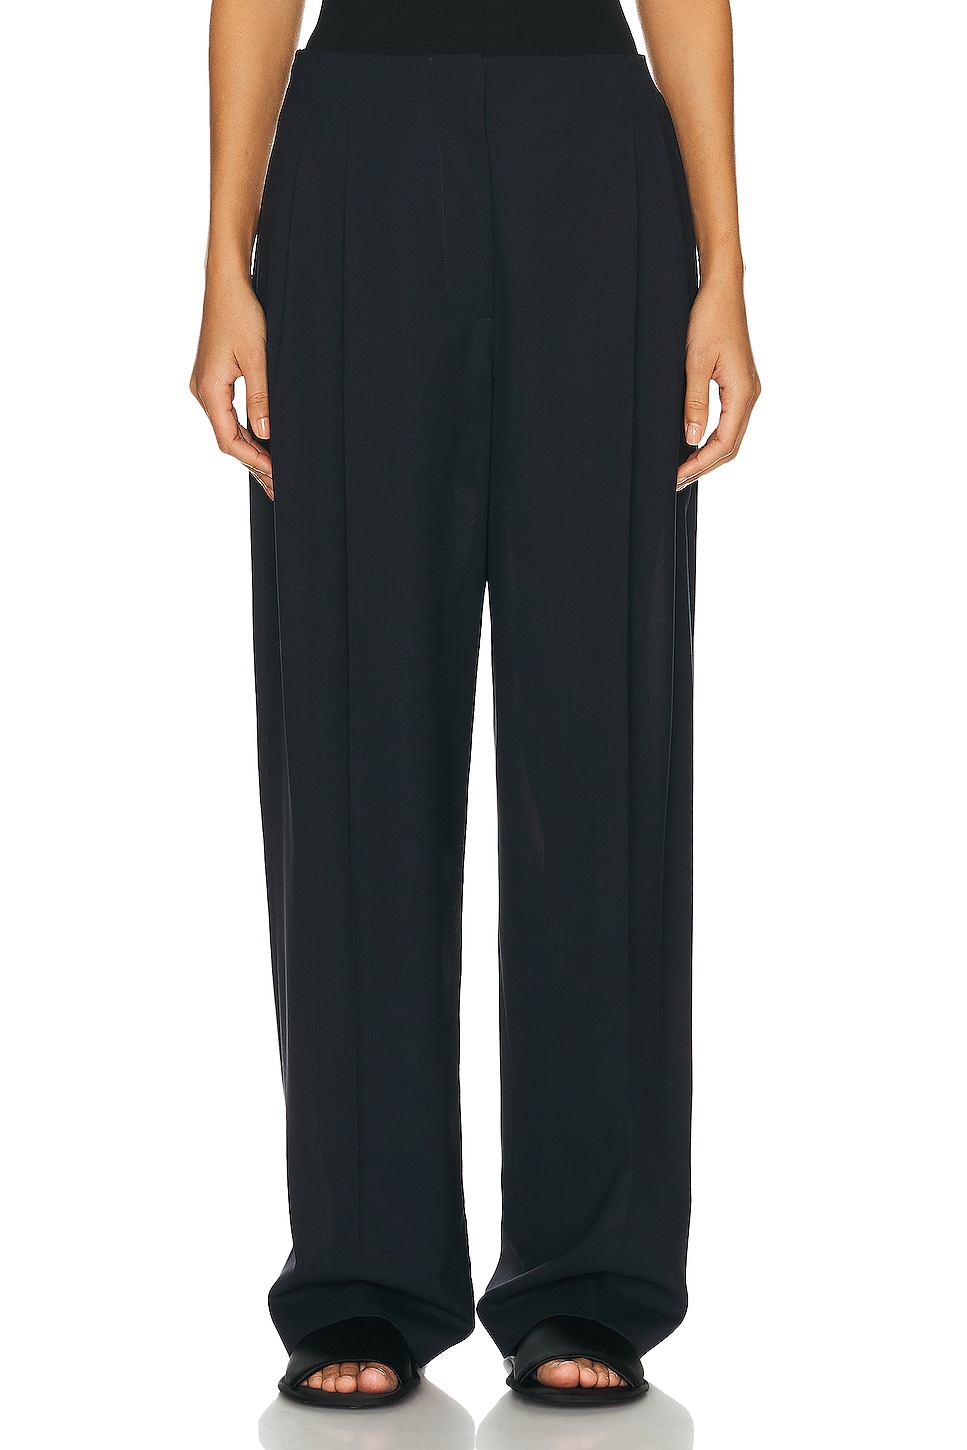 Image 1 of The Row Lonan Pant in Navy